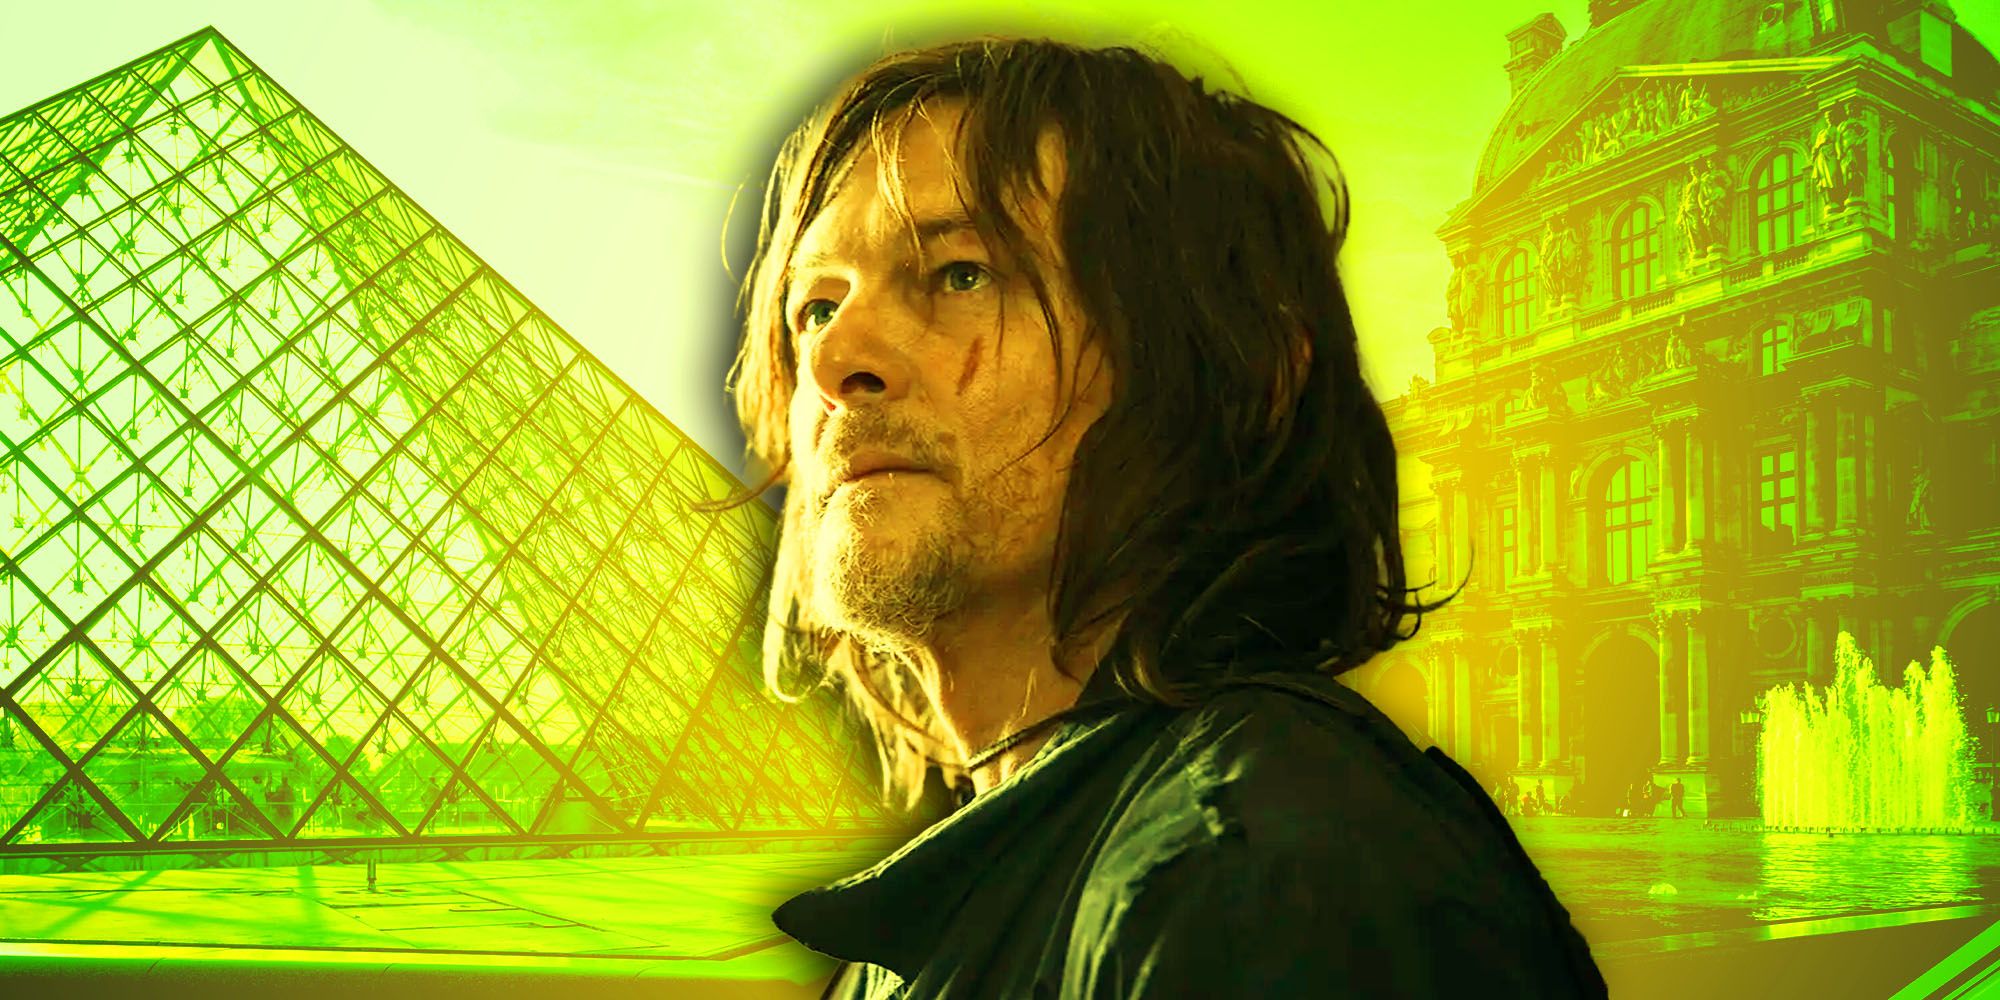 Norman Reedus as Daryl Dixon in France in The Walking Dead: Daryl Dixon.